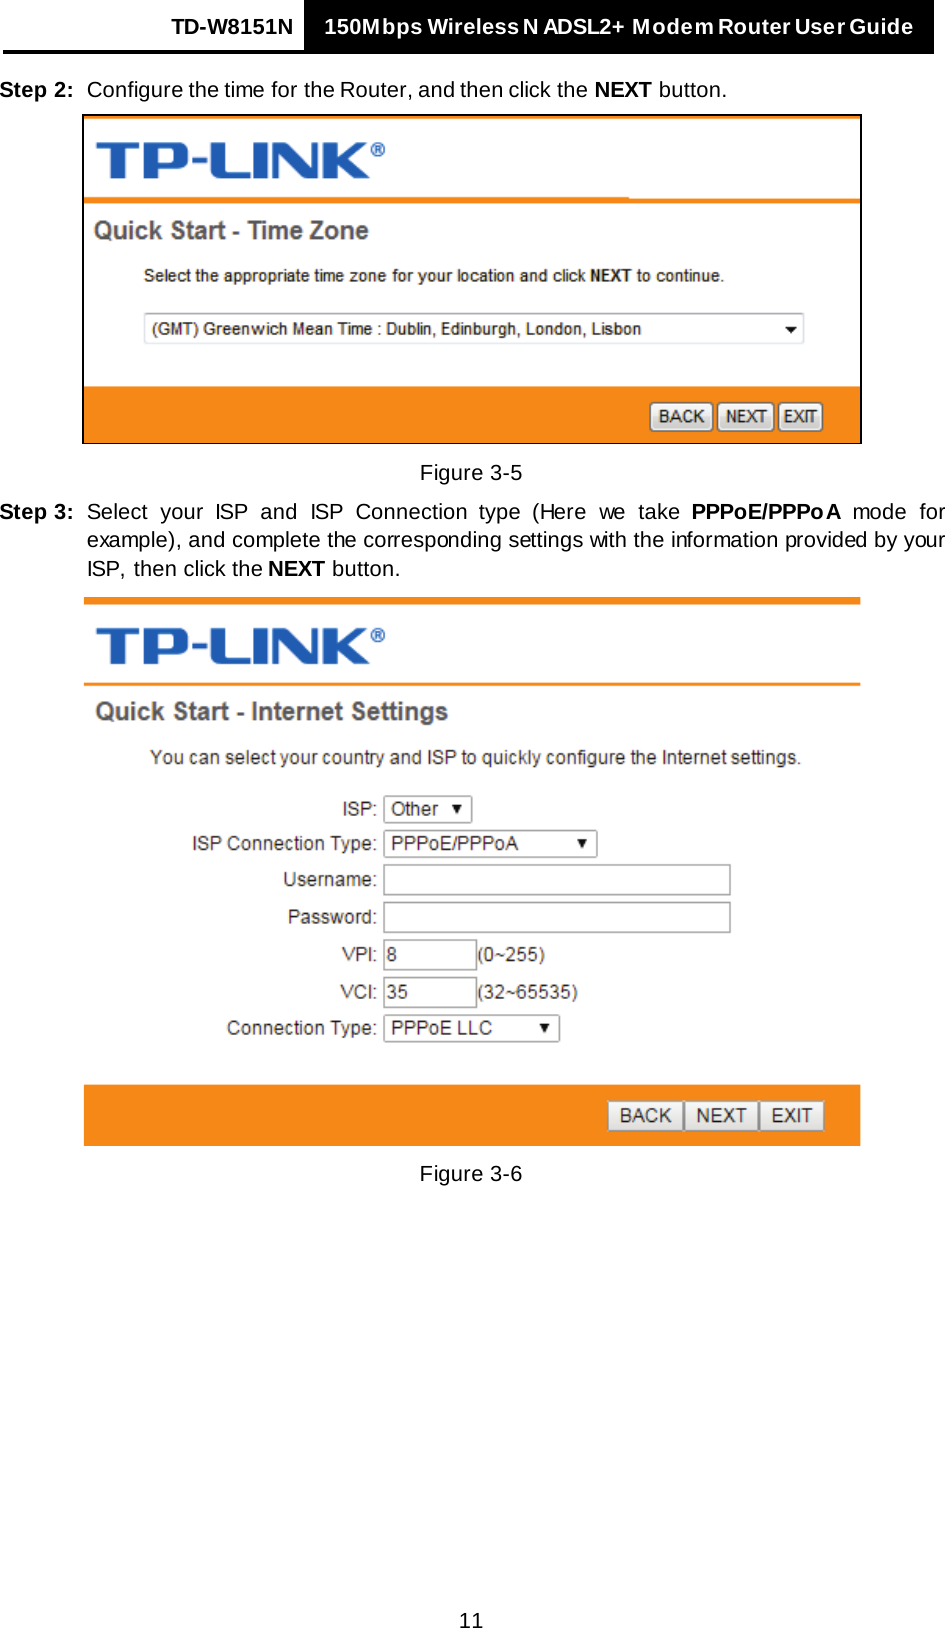 TD-W8151N 150Mbps Wireless N ADSL2+ Modem Router User Guide   11 Step 2: Configure the time for the Router, and then click the NEXT button.  Figure 3-5 Step 3: Select your ISP and ISP Connection type (Here we take  PPPoE/PPPoA mode for example), and complete the corresponding settings with the information provided by your ISP, then click the NEXT button.  Figure 3-6 